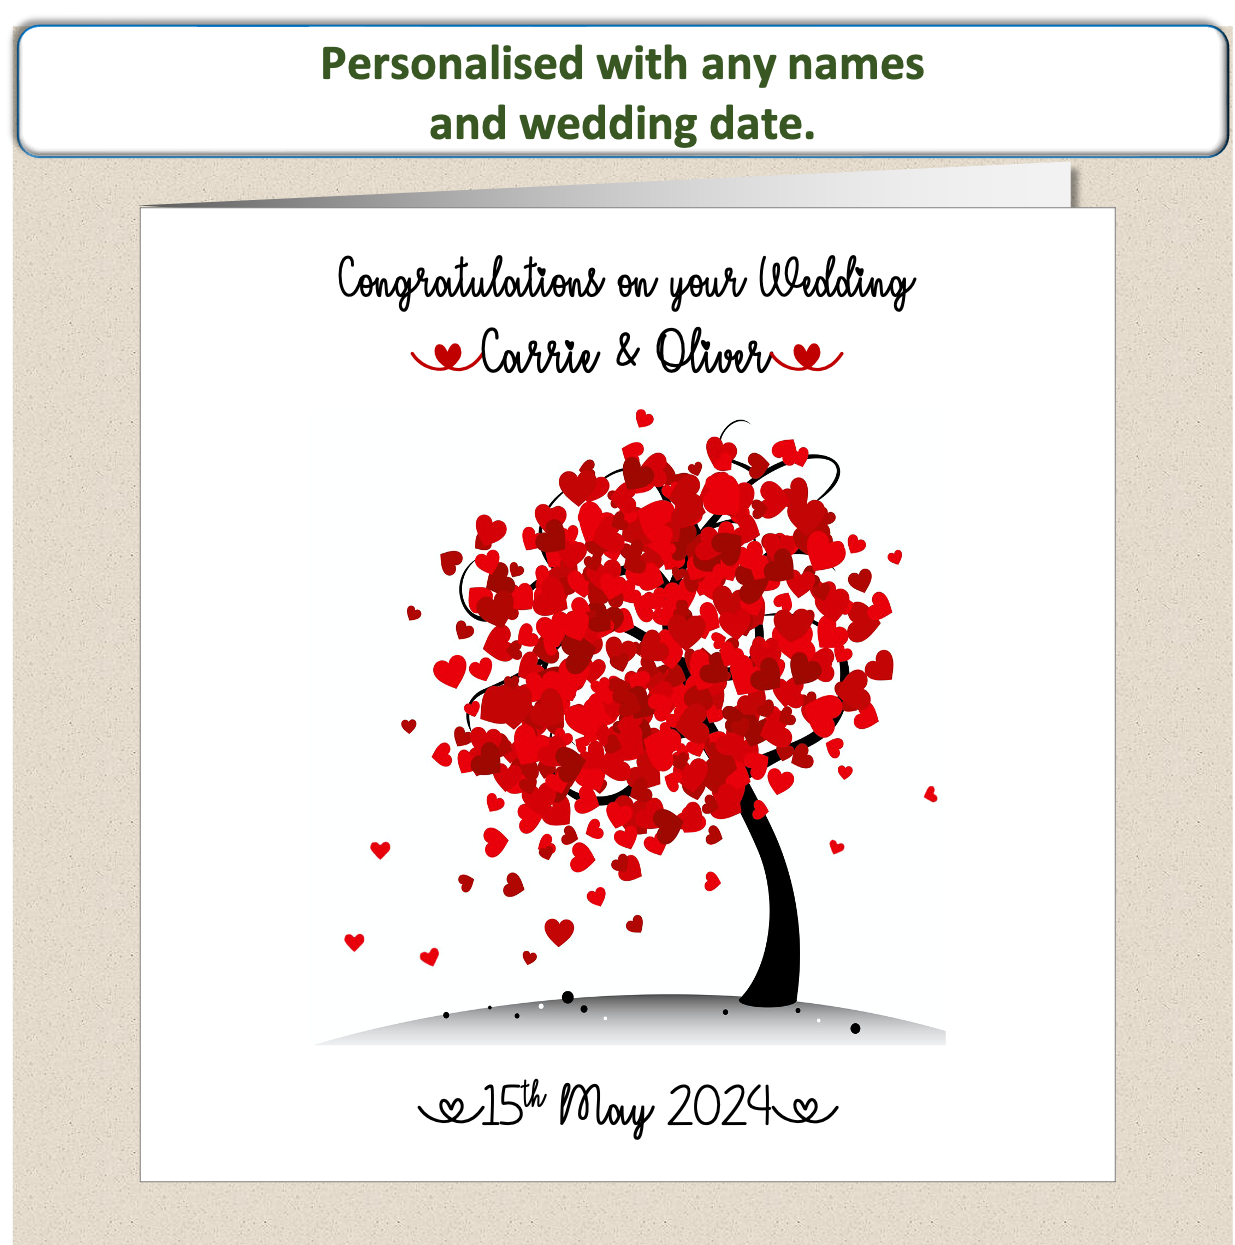 Personalised Wedding Day Happy Couple card - heart tree